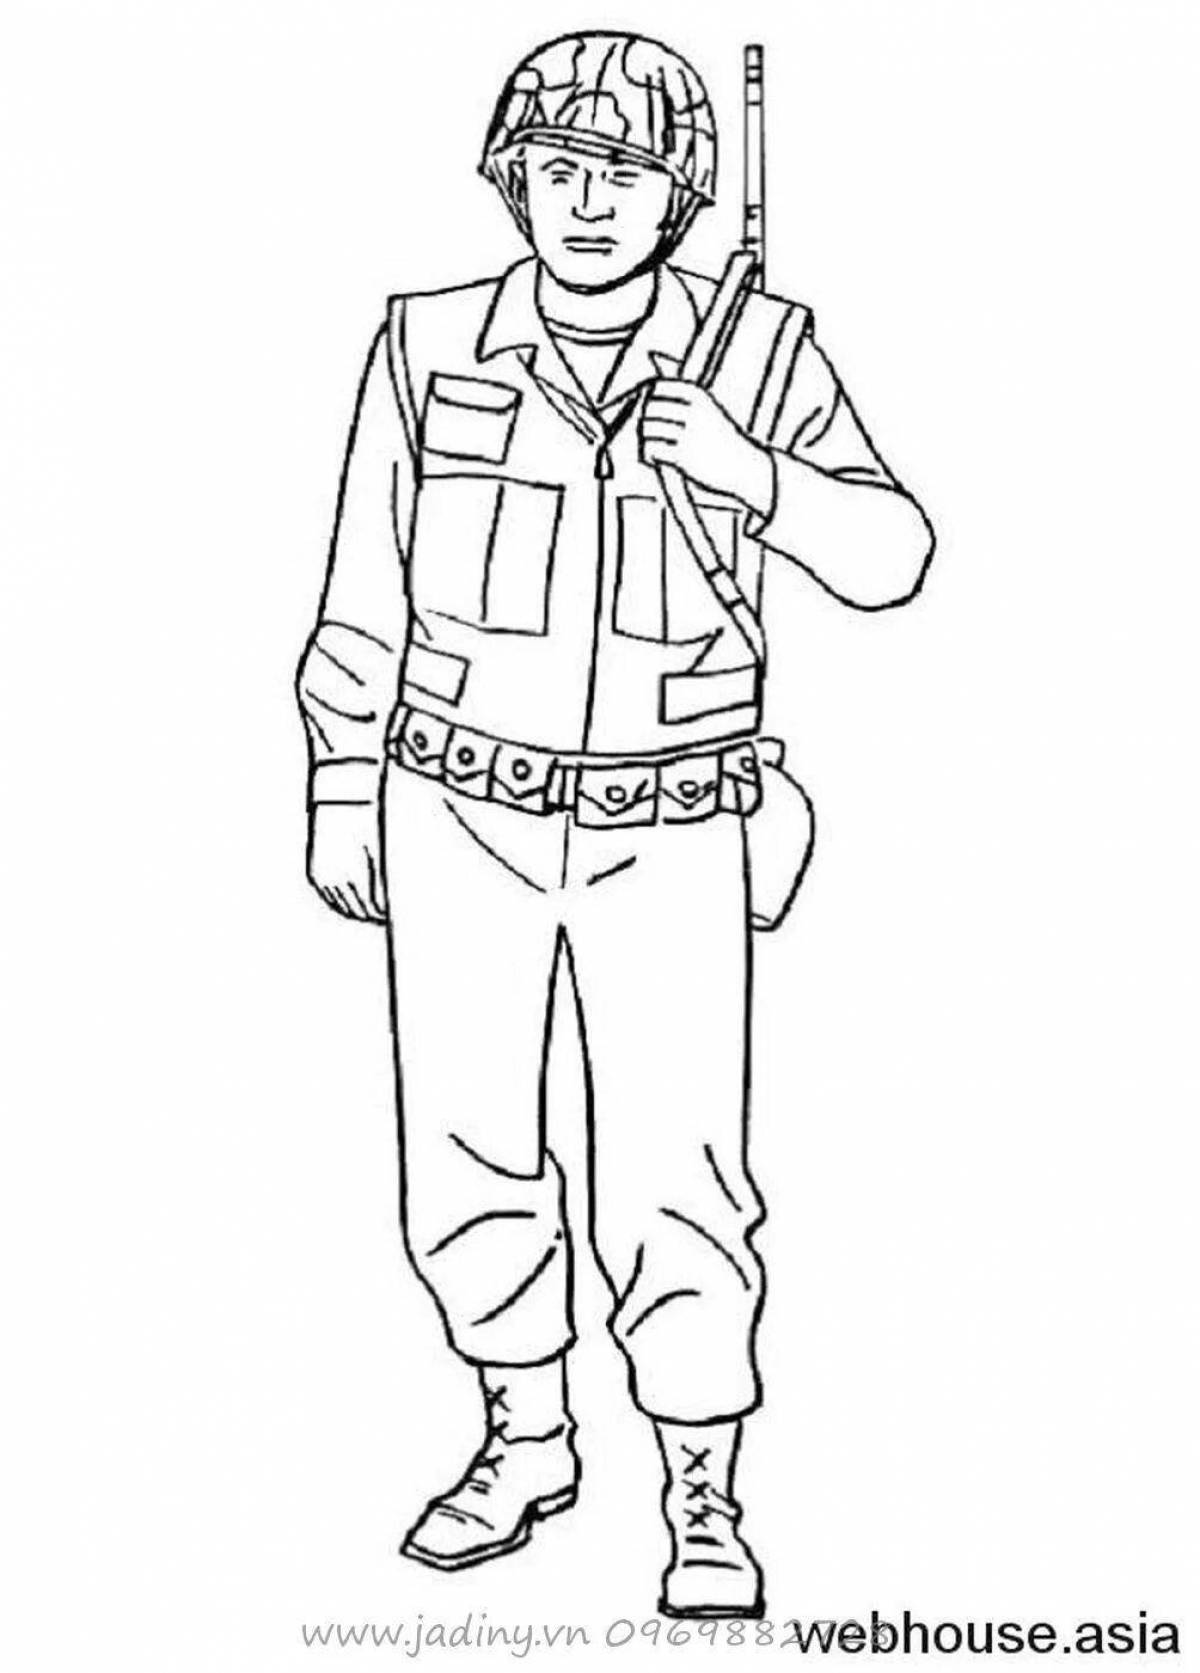 Fun military drawing for kids